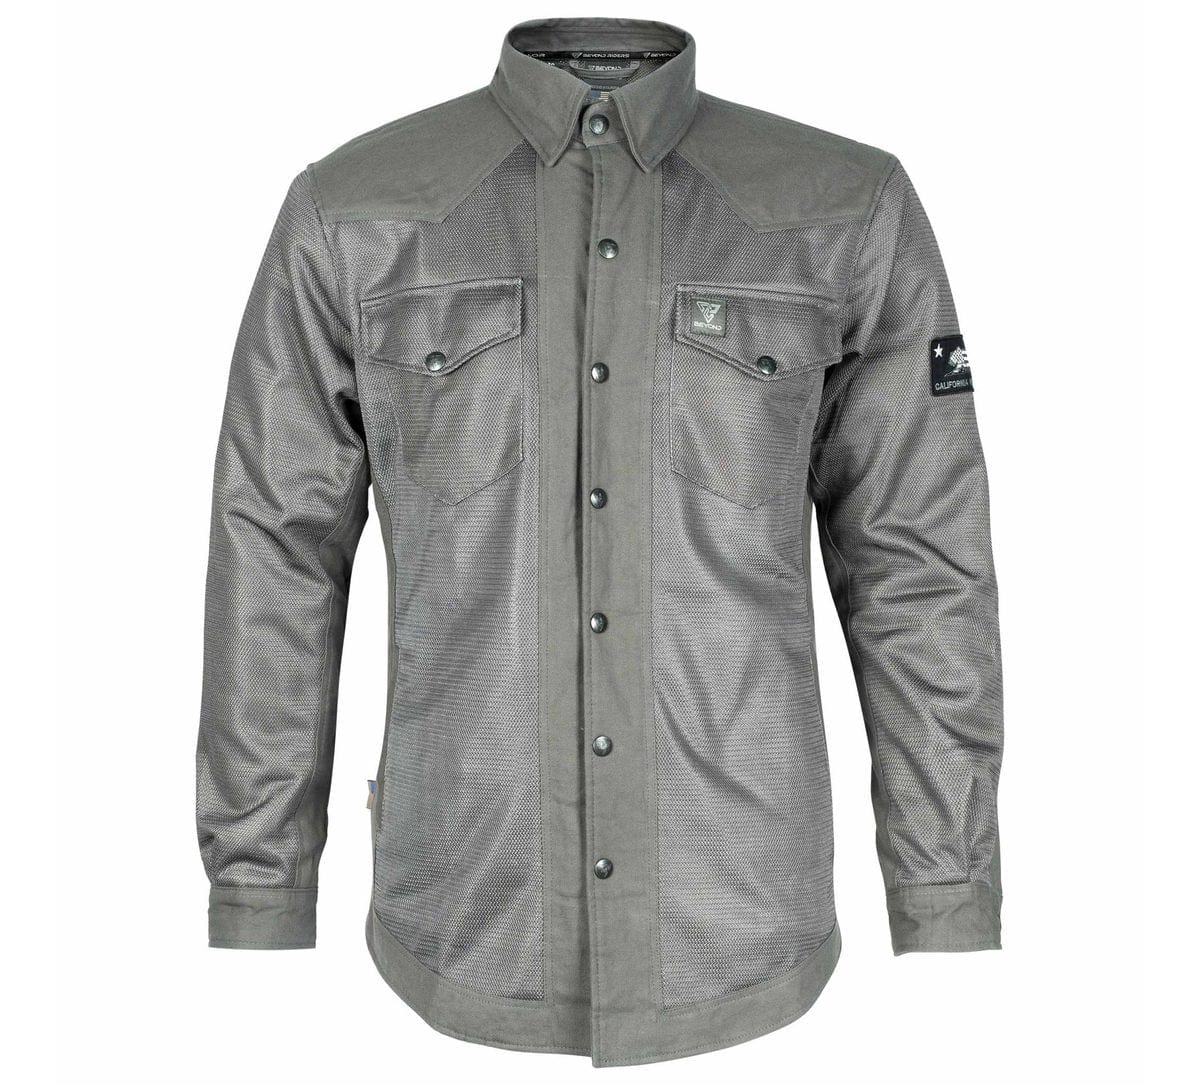 Protective Summer Mesh Shirt with Pads - Grey Solid